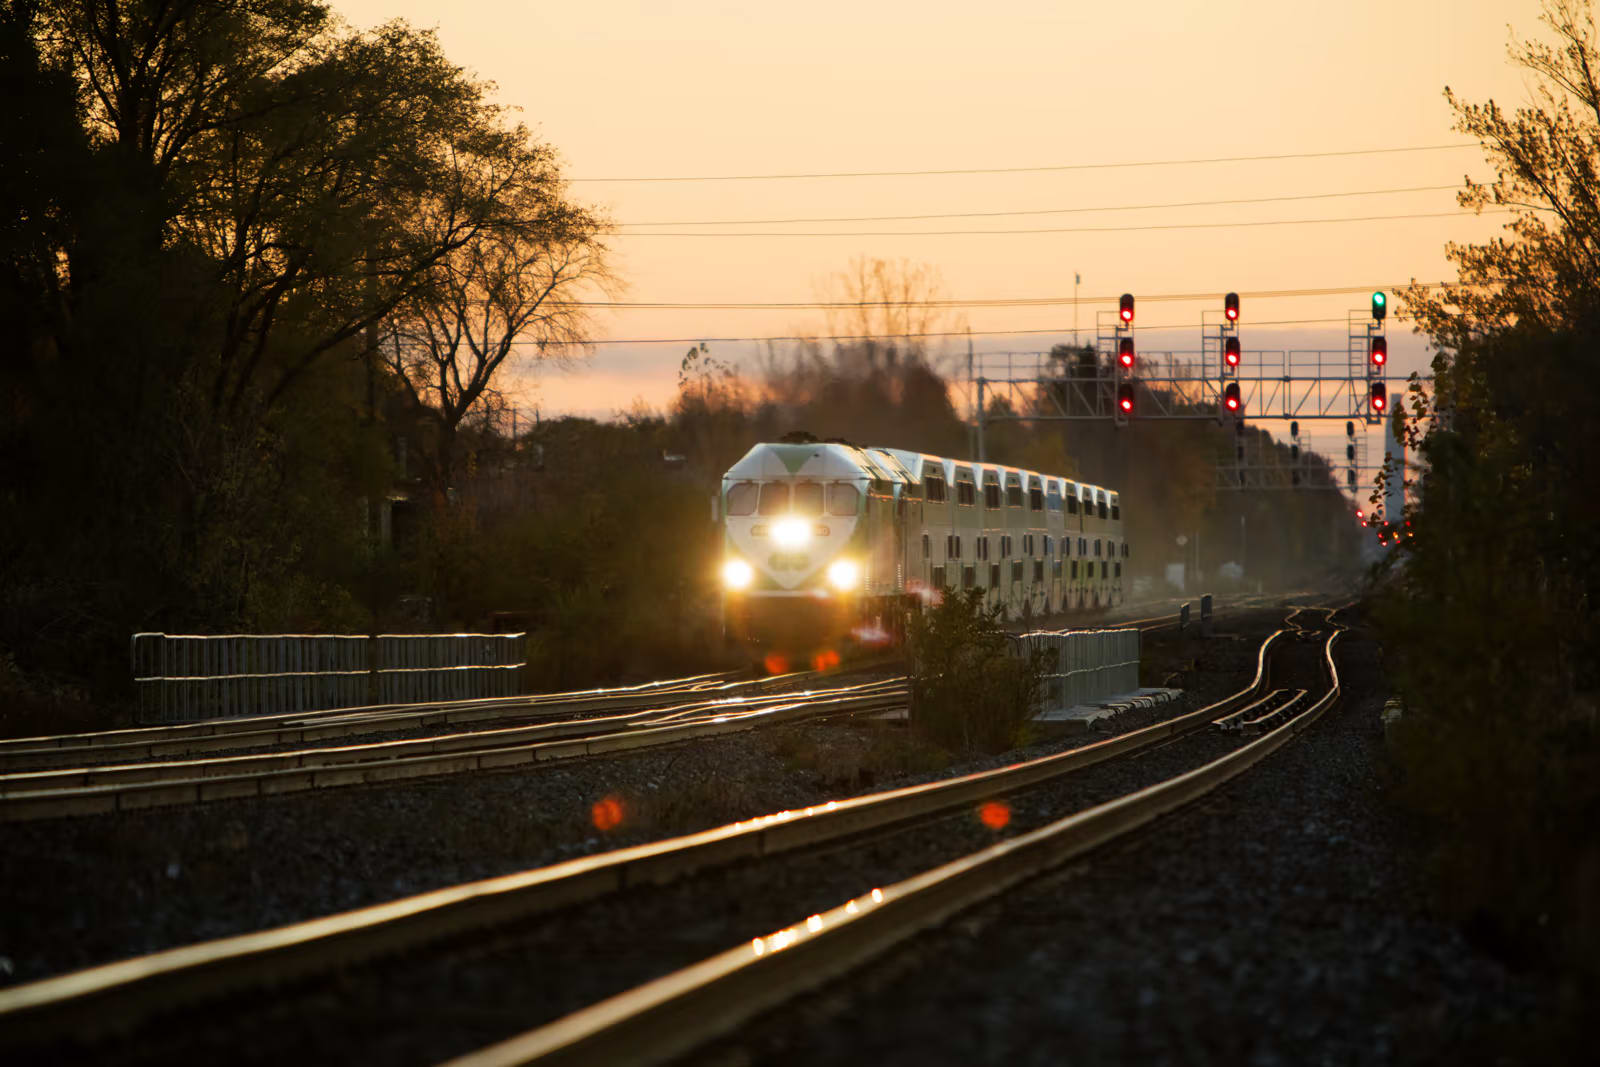 A GO train makes a run along tracks during an early morning commute.